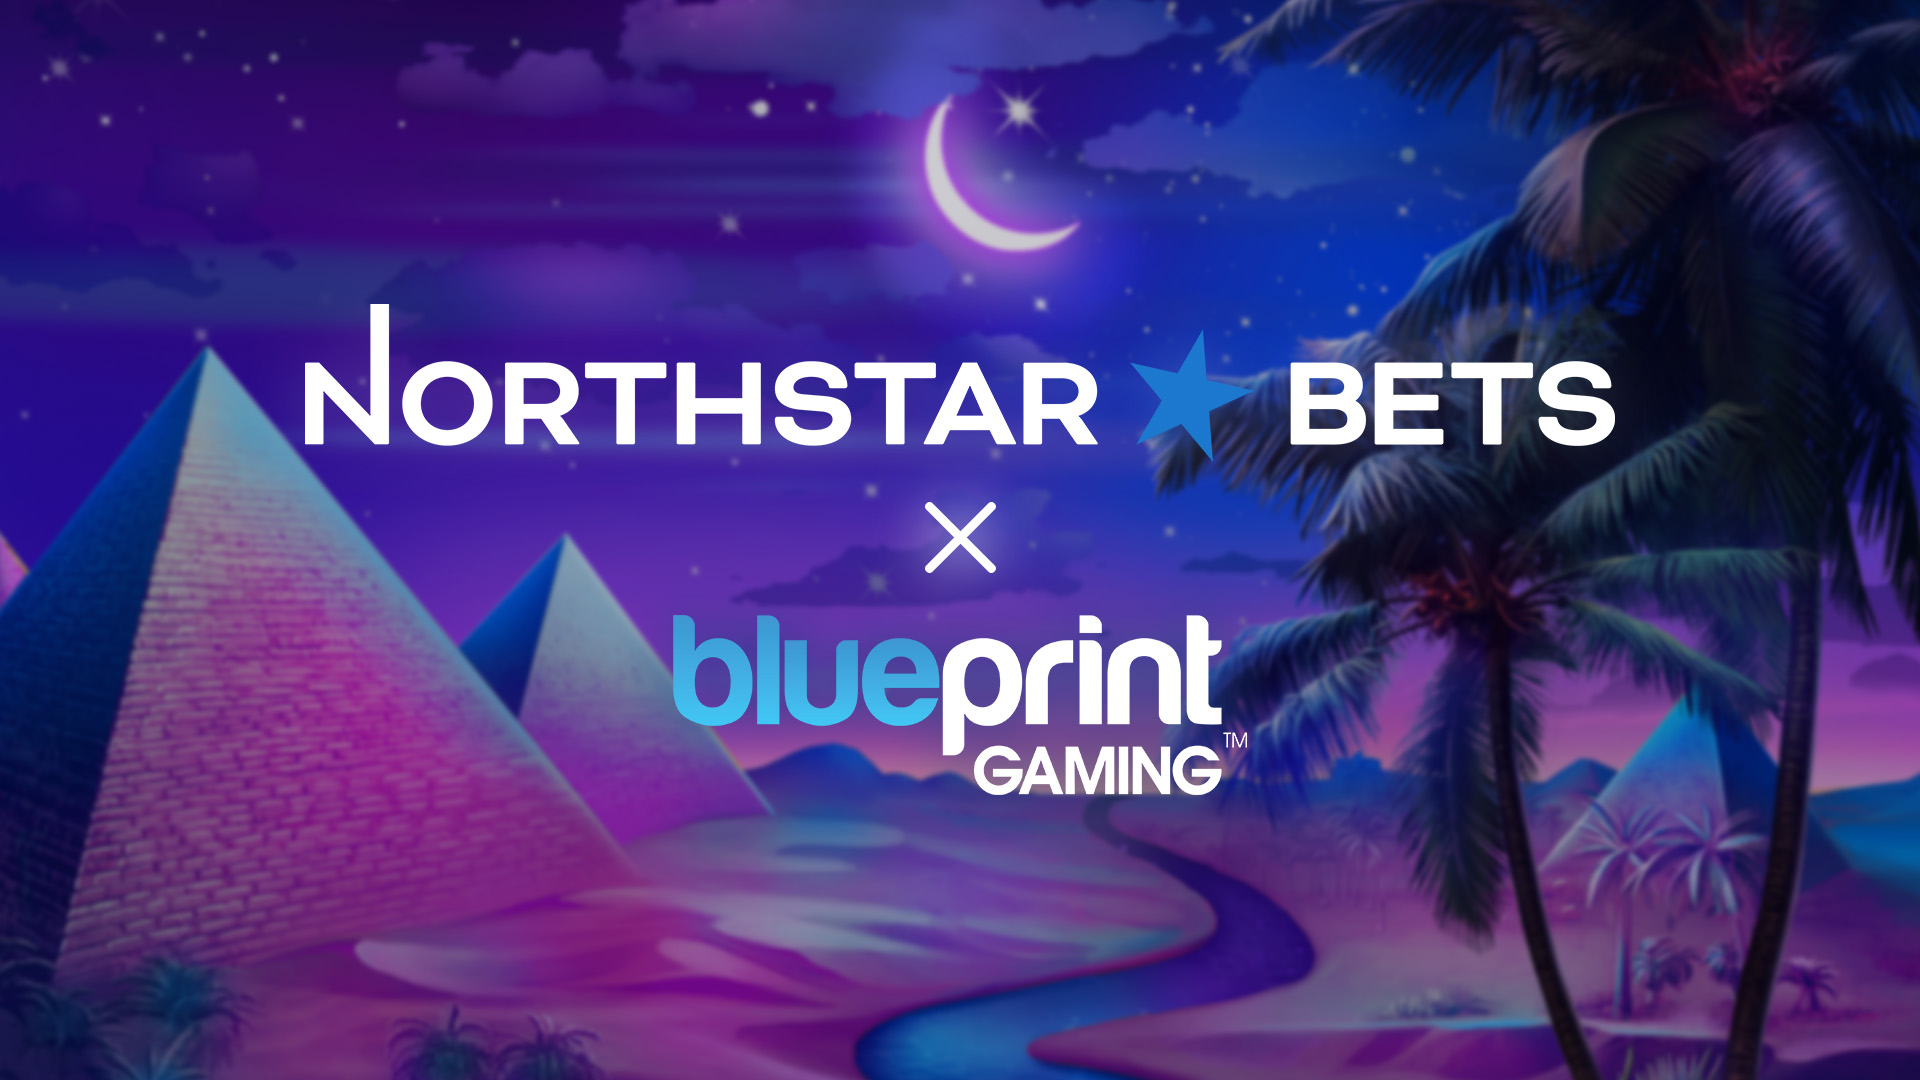 Blueprint Gaming expands presence in Ontario through new NorthStar Bets partnership